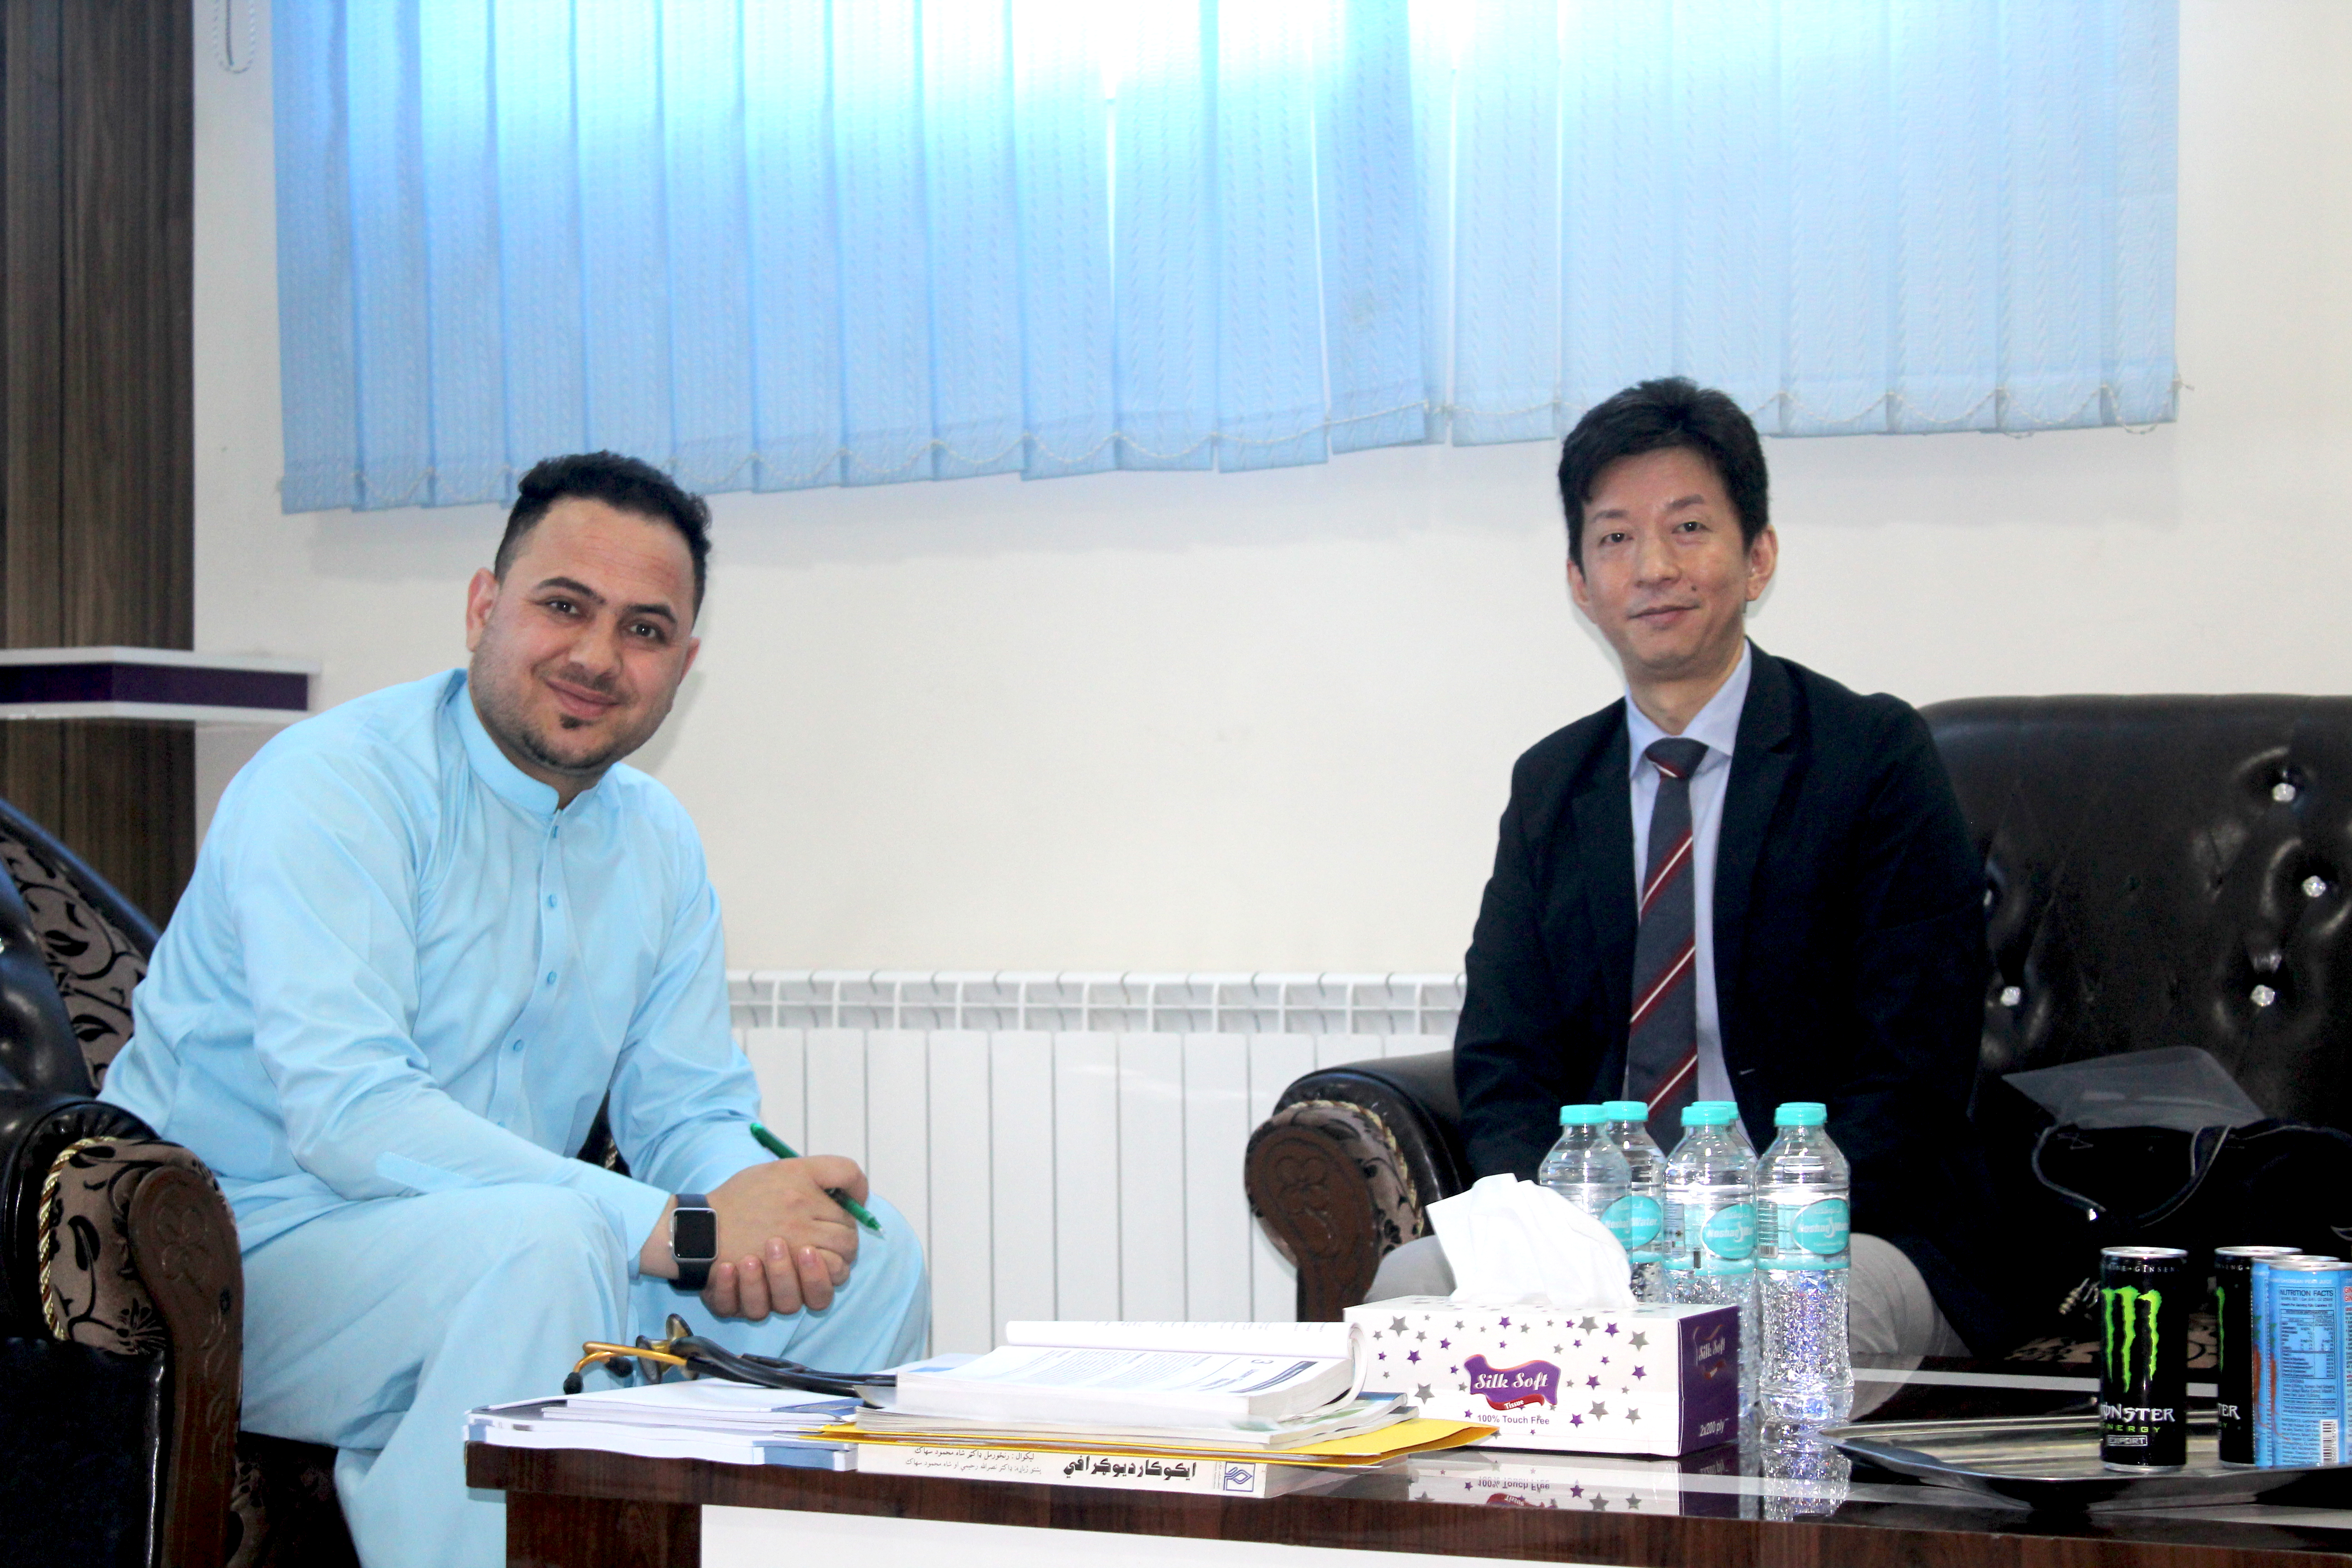 Zwan Curative Hospital signed a cooperation agreement with the Embassy of Japan in Afghanistan